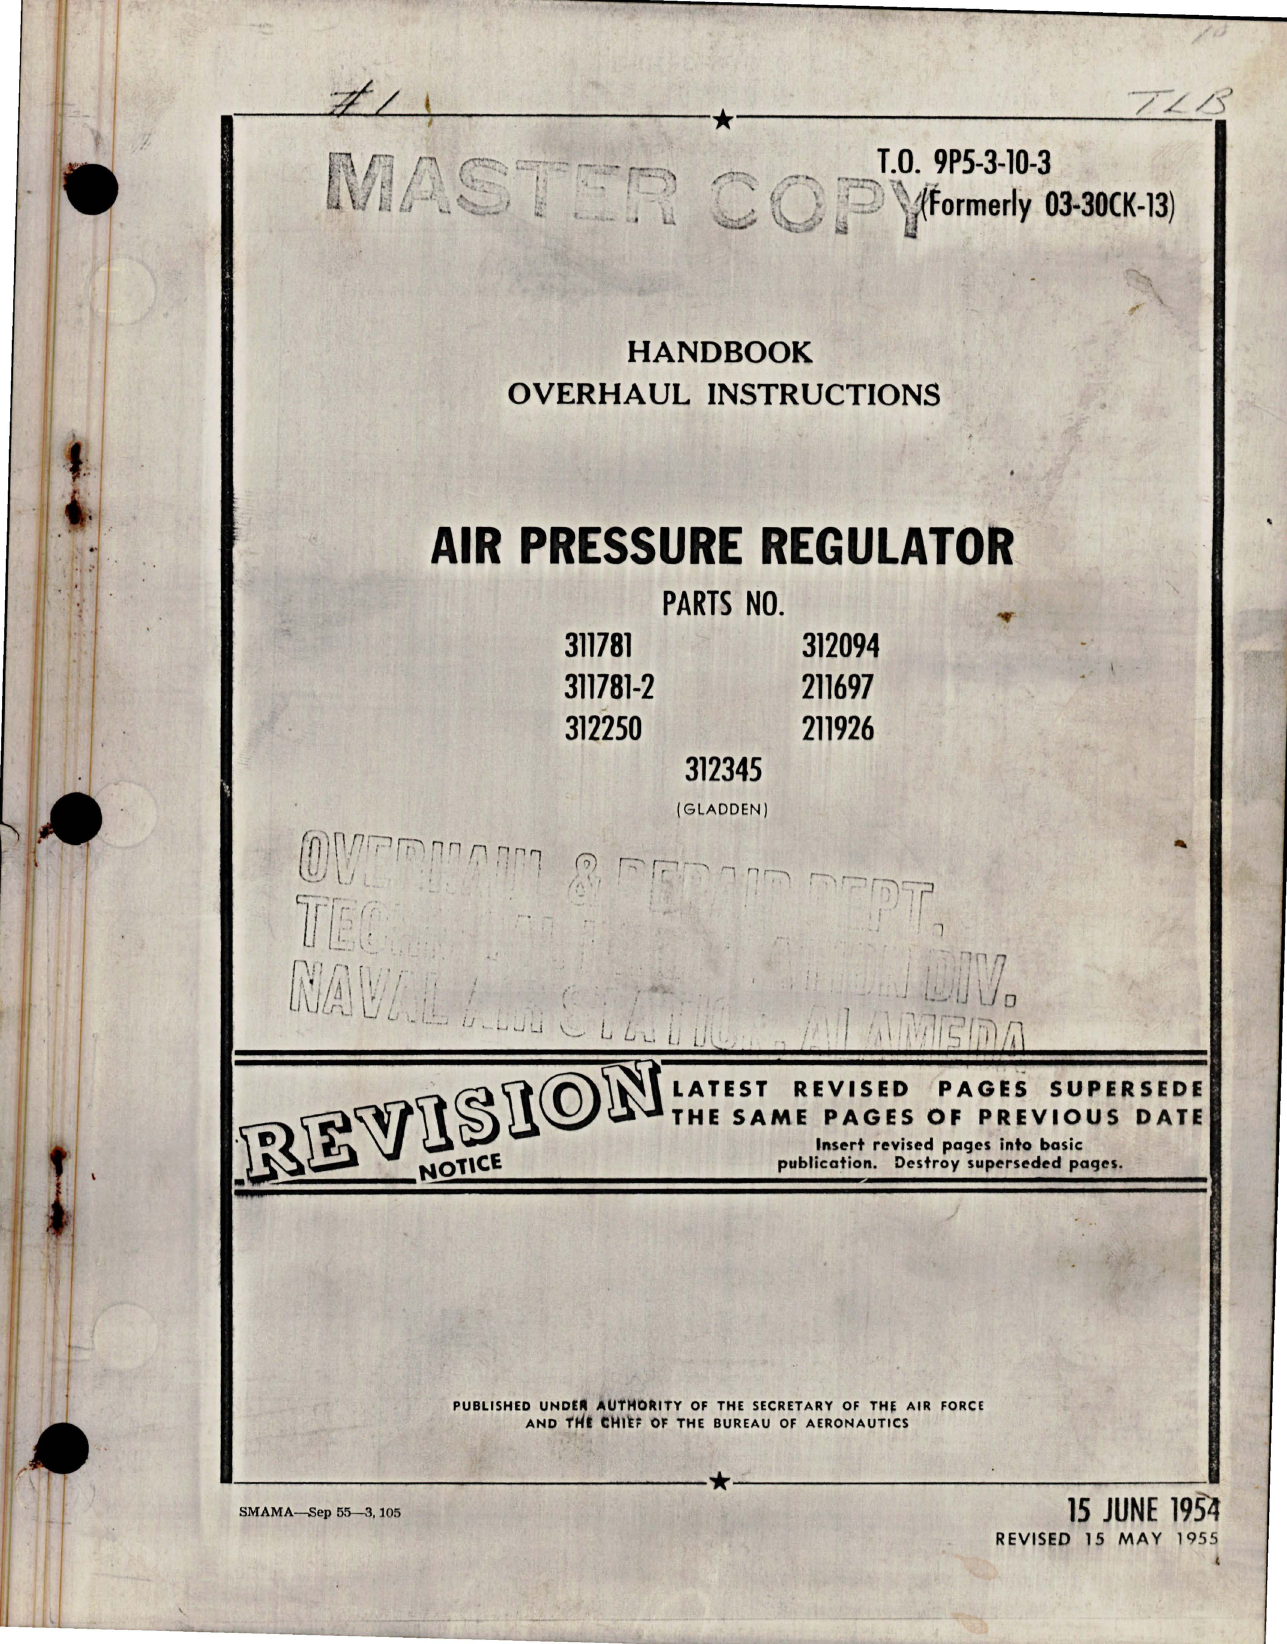 Sample page 1 from AirCorps Library document: Overhaul Instructions for Air Pressure Regulator